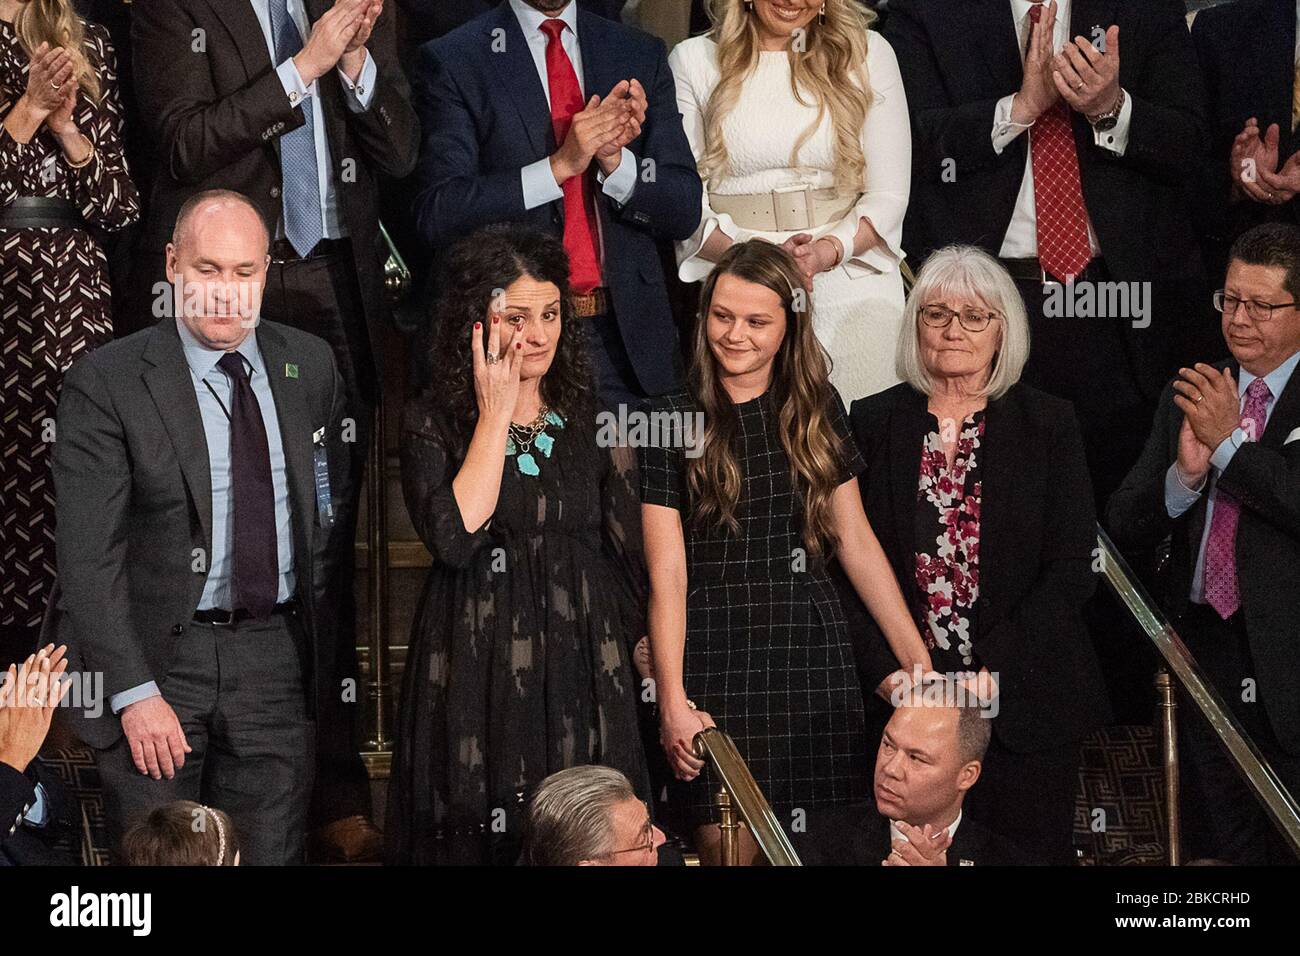 Debra Bissell, Madison Armstrong and Heather Armstrong, who lost loved ones in a home invasion by an illegal immigrant in January 2019, are recognized by President Donald J. Trump Tuesday evening, Feb. 5, 2019, during President Trump’s State of the Union Address at the U.S. Capitol in Washington, D.C. 2019 State of the Union Stock Photo